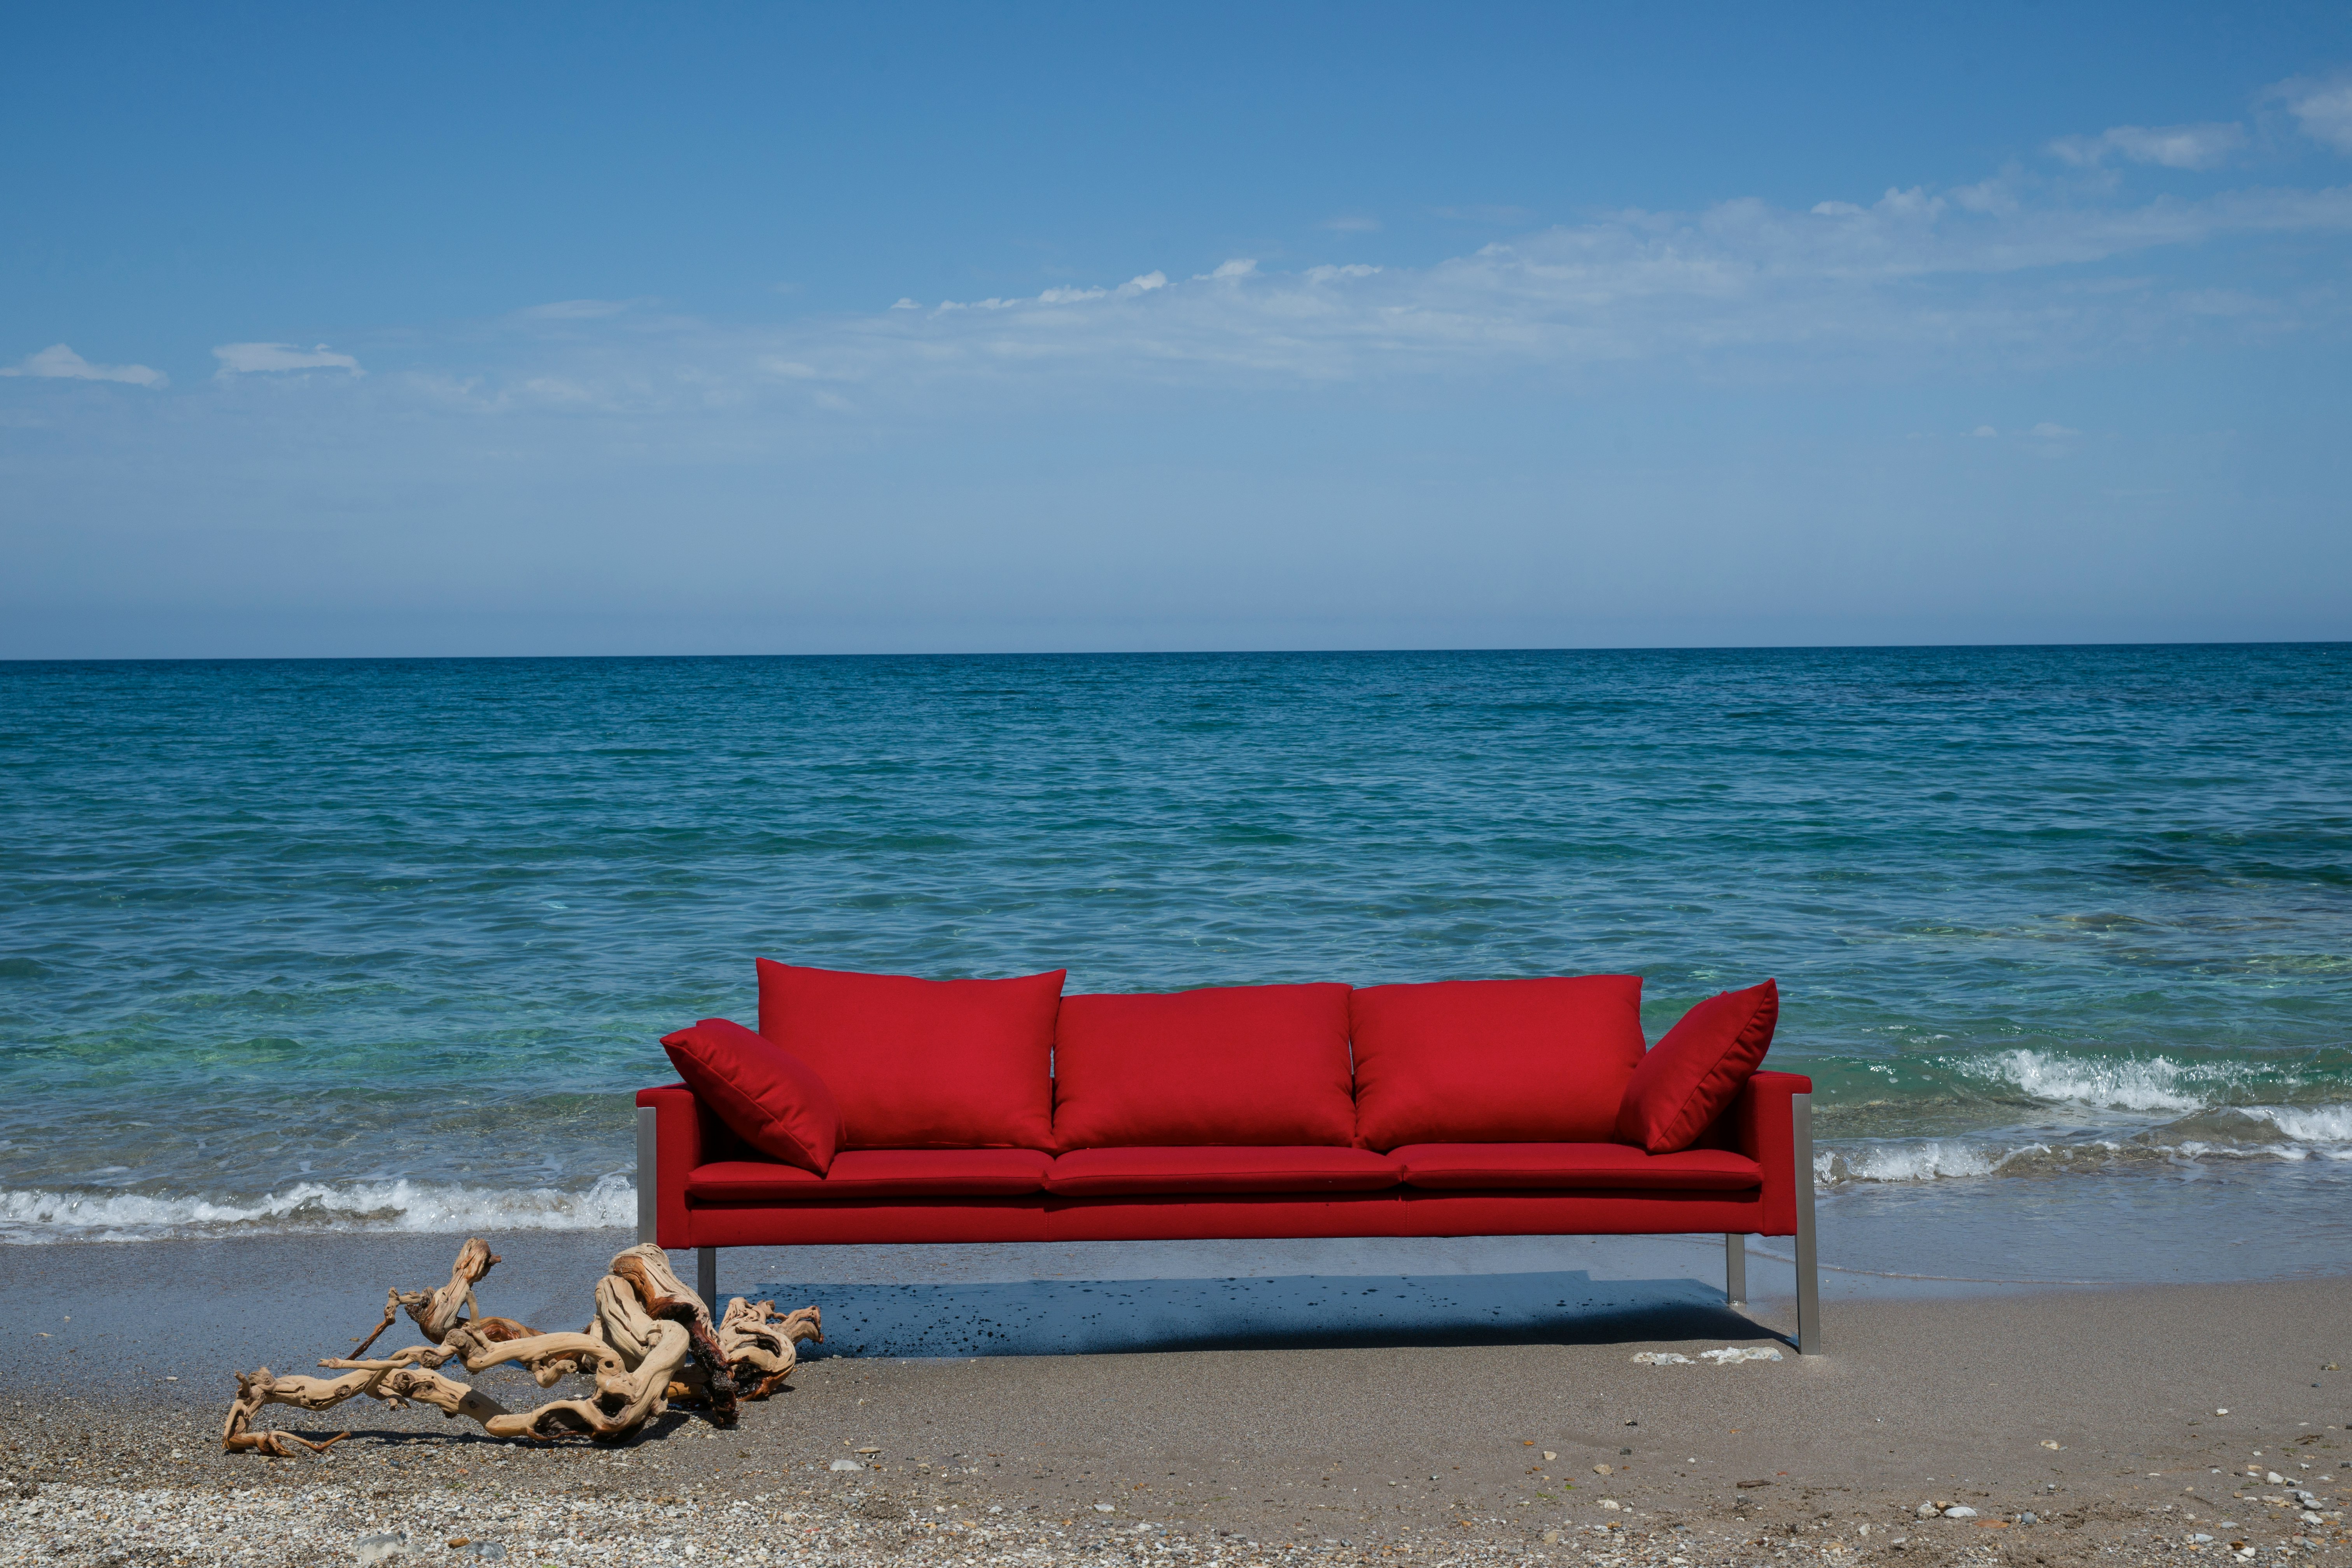 red padded couch on beach shore during daytime